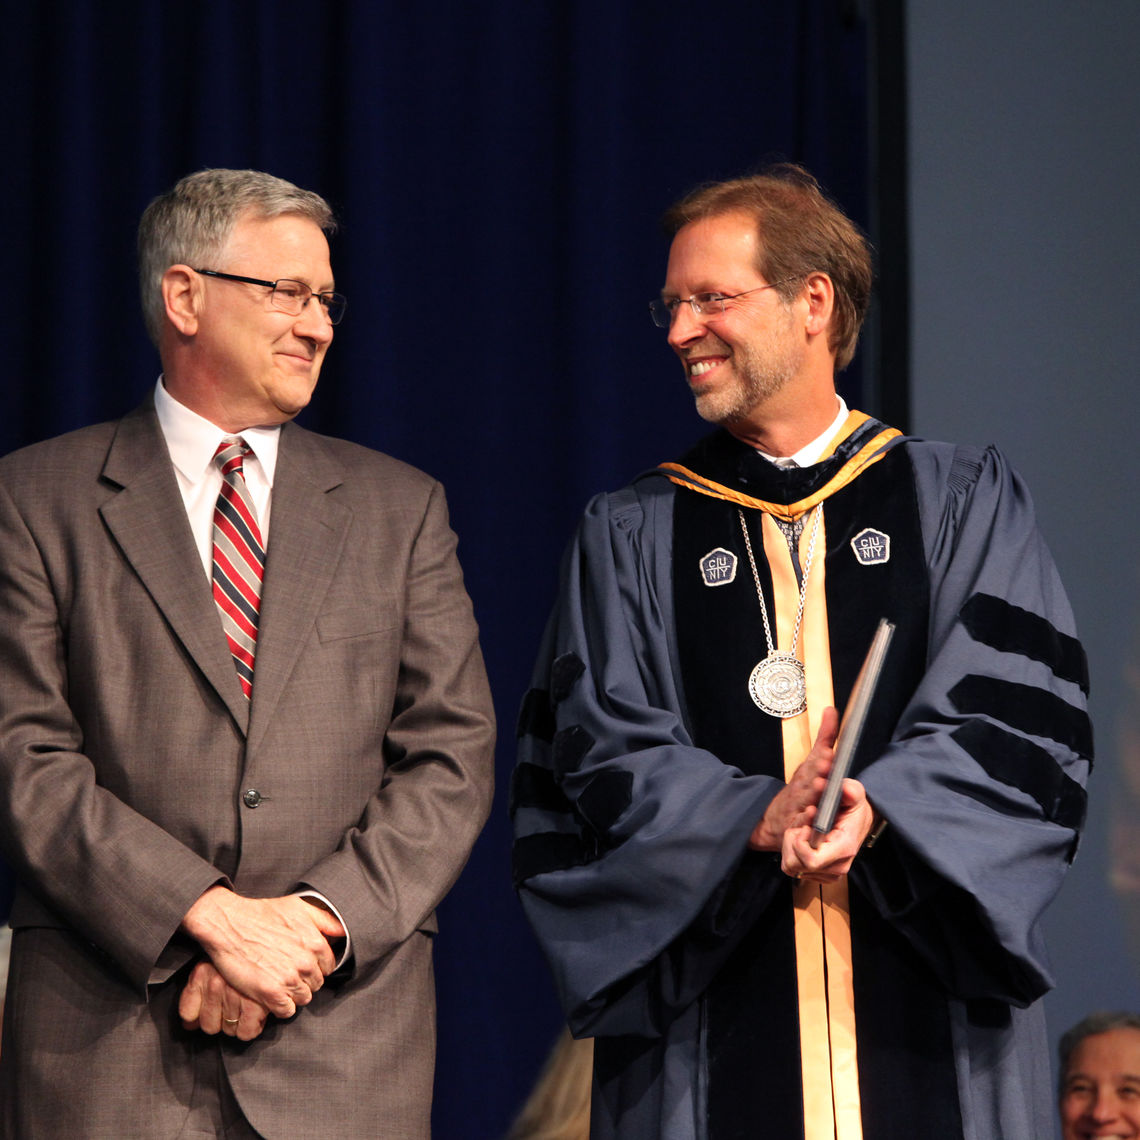 Dick Denlinger, here with President Daniel R. Porterfield, has been working for Franklin & Marshall College since 1976.